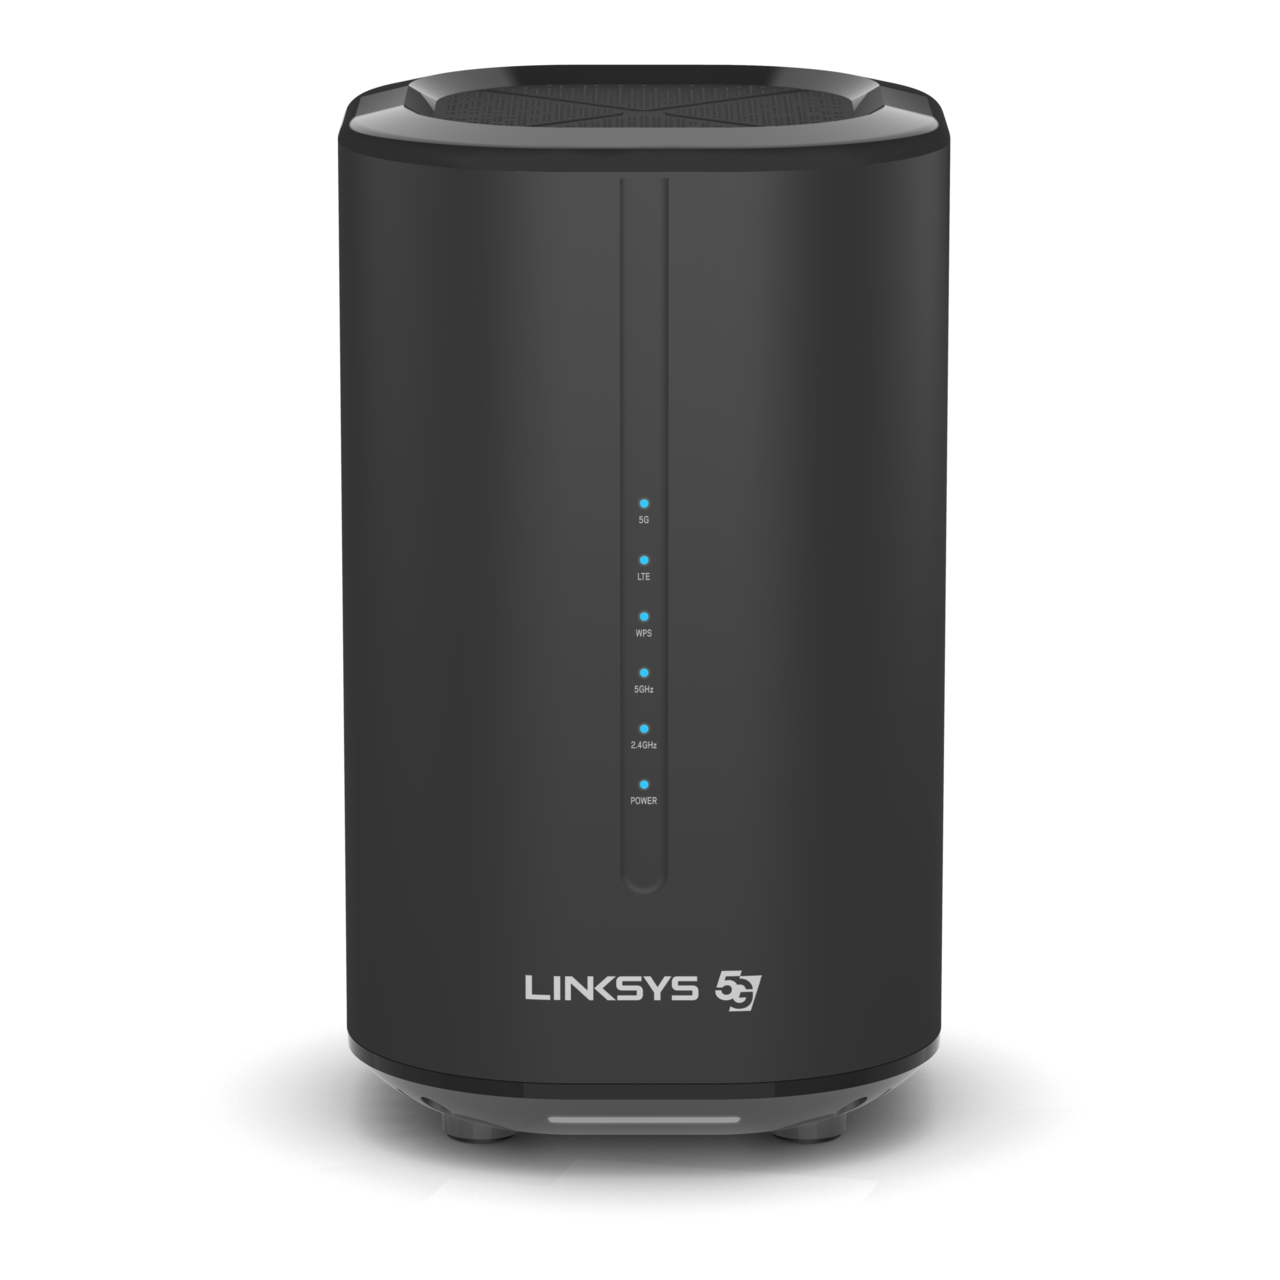 Linksys 5G Modem - Linksys 5G Routers - Buy From Northland Systems